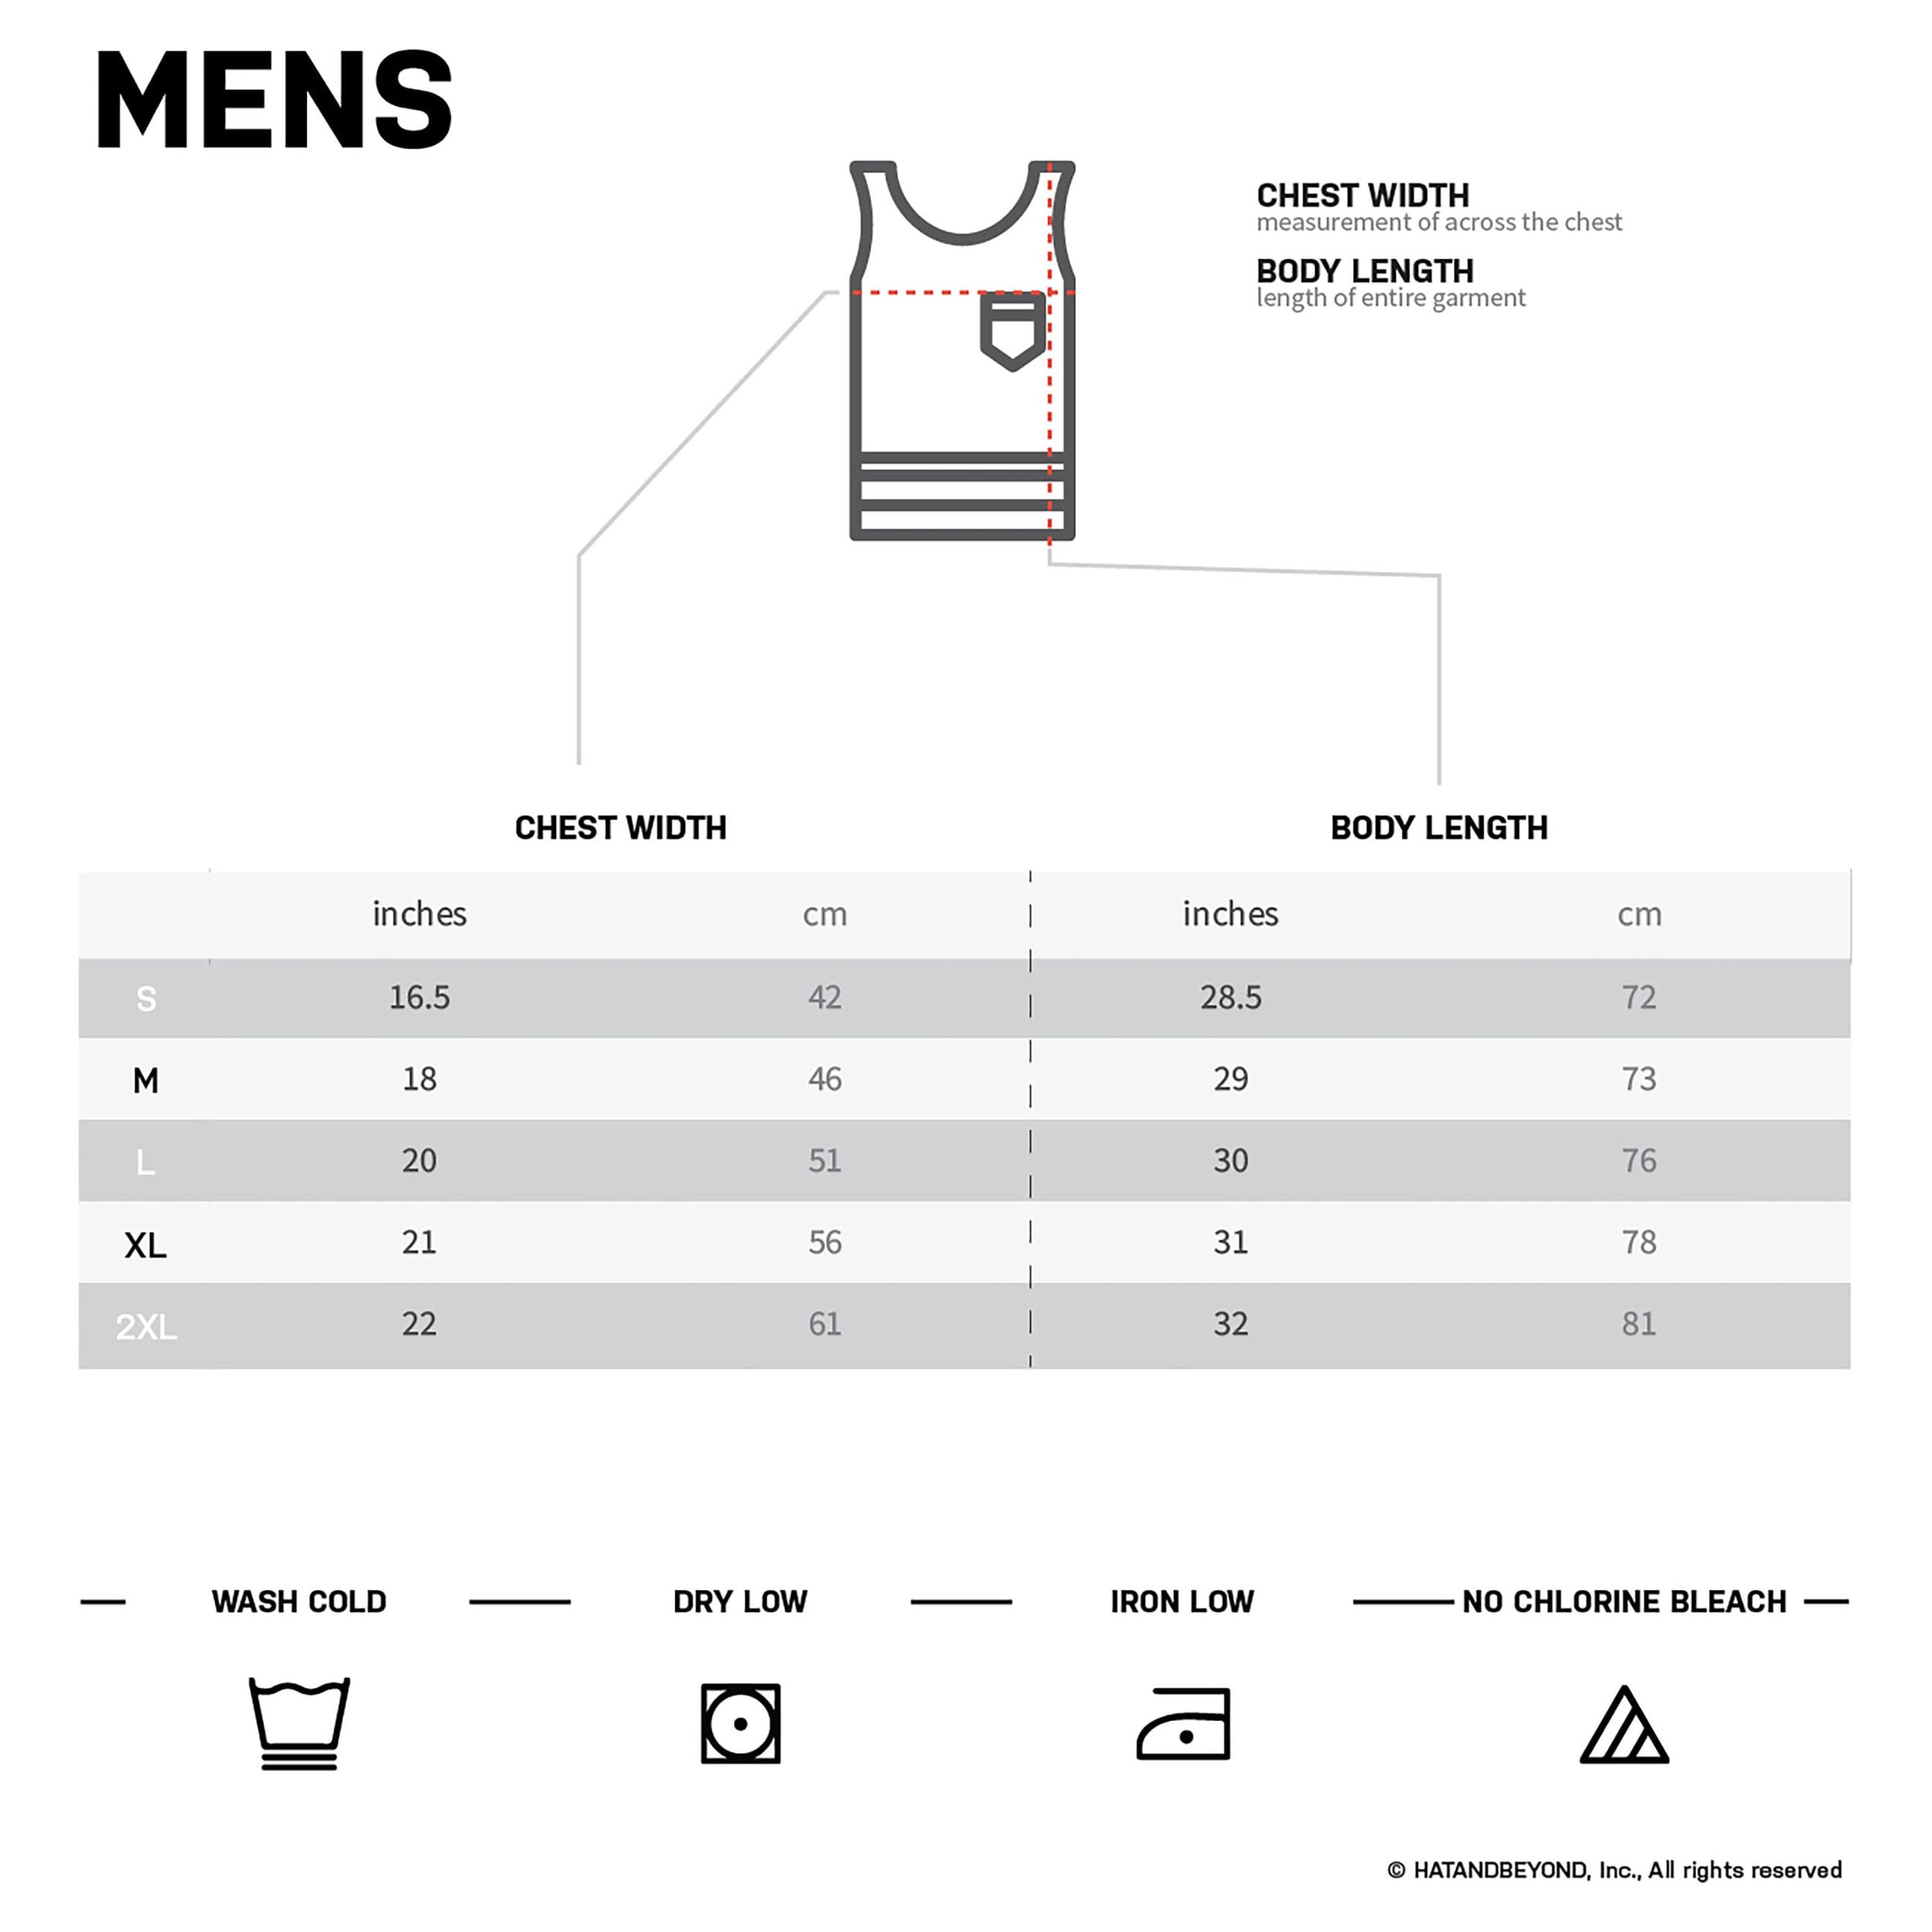 Hat and Beyond Men's Muscle Gym Tank Top Sleeveless T-Shirts - image 5 of 5